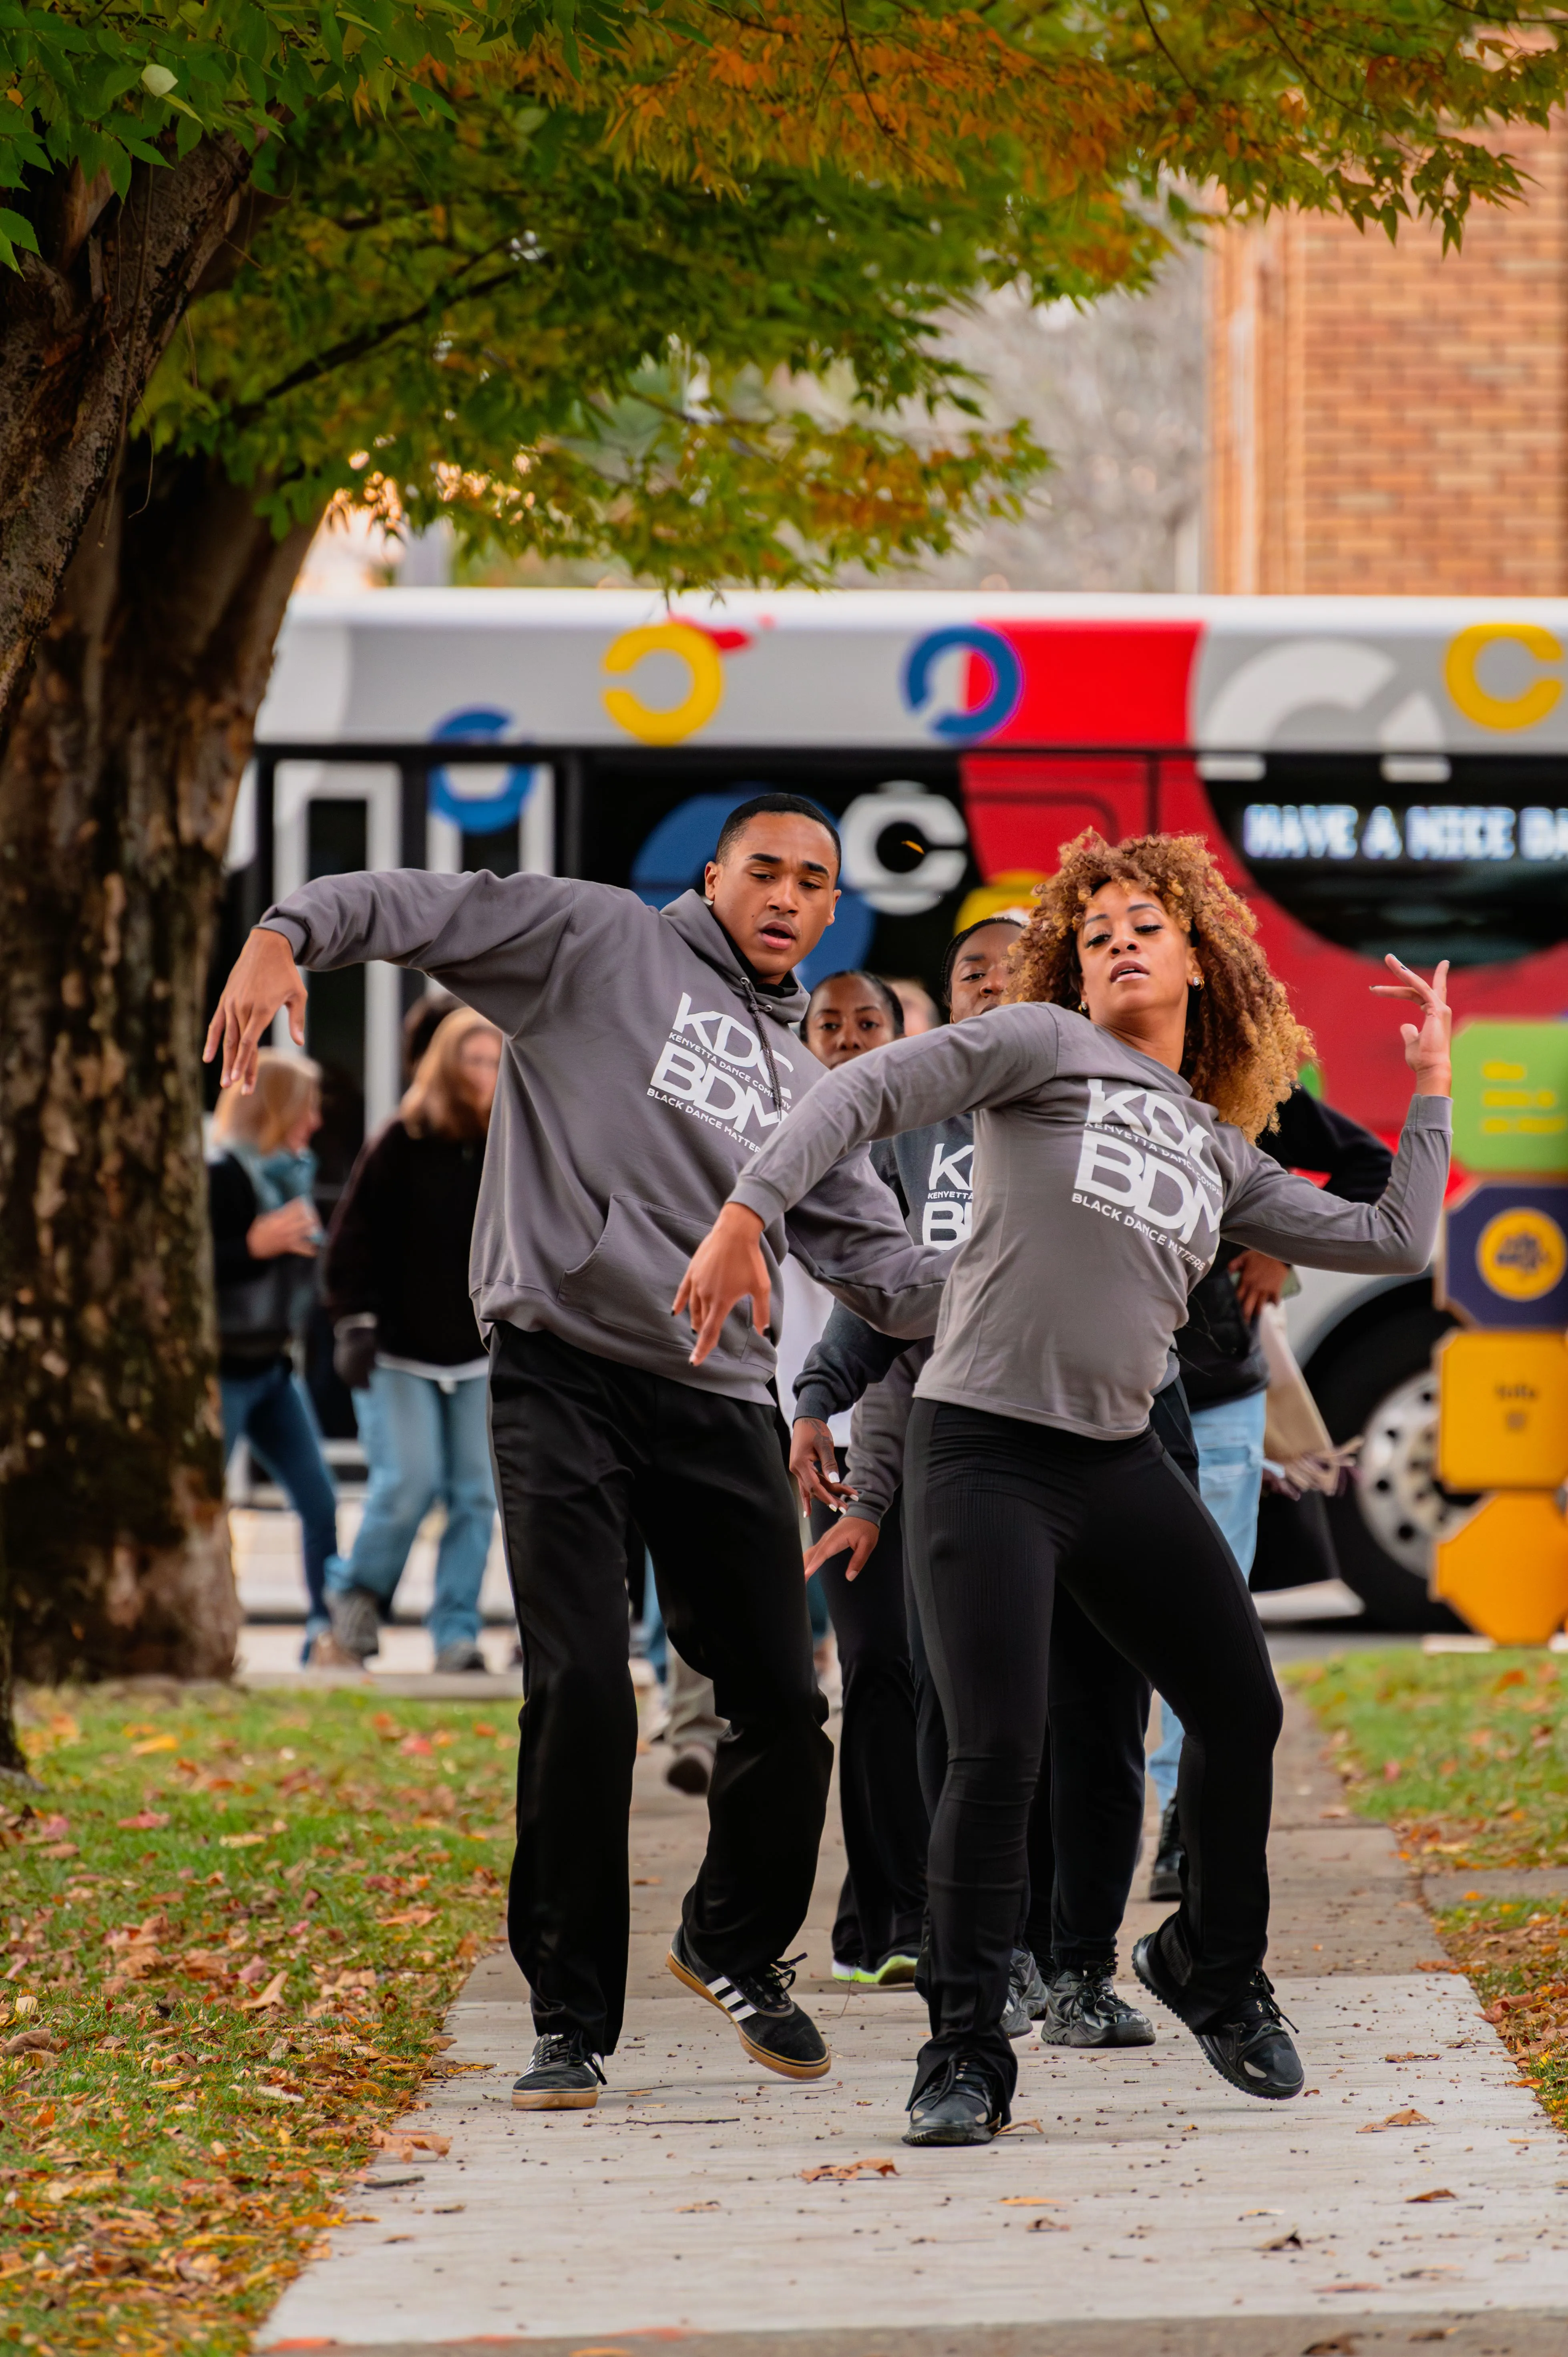 Group of people playfully dancing on a sidewalk with autumn leaves on the ground and a colorful bus in the background.